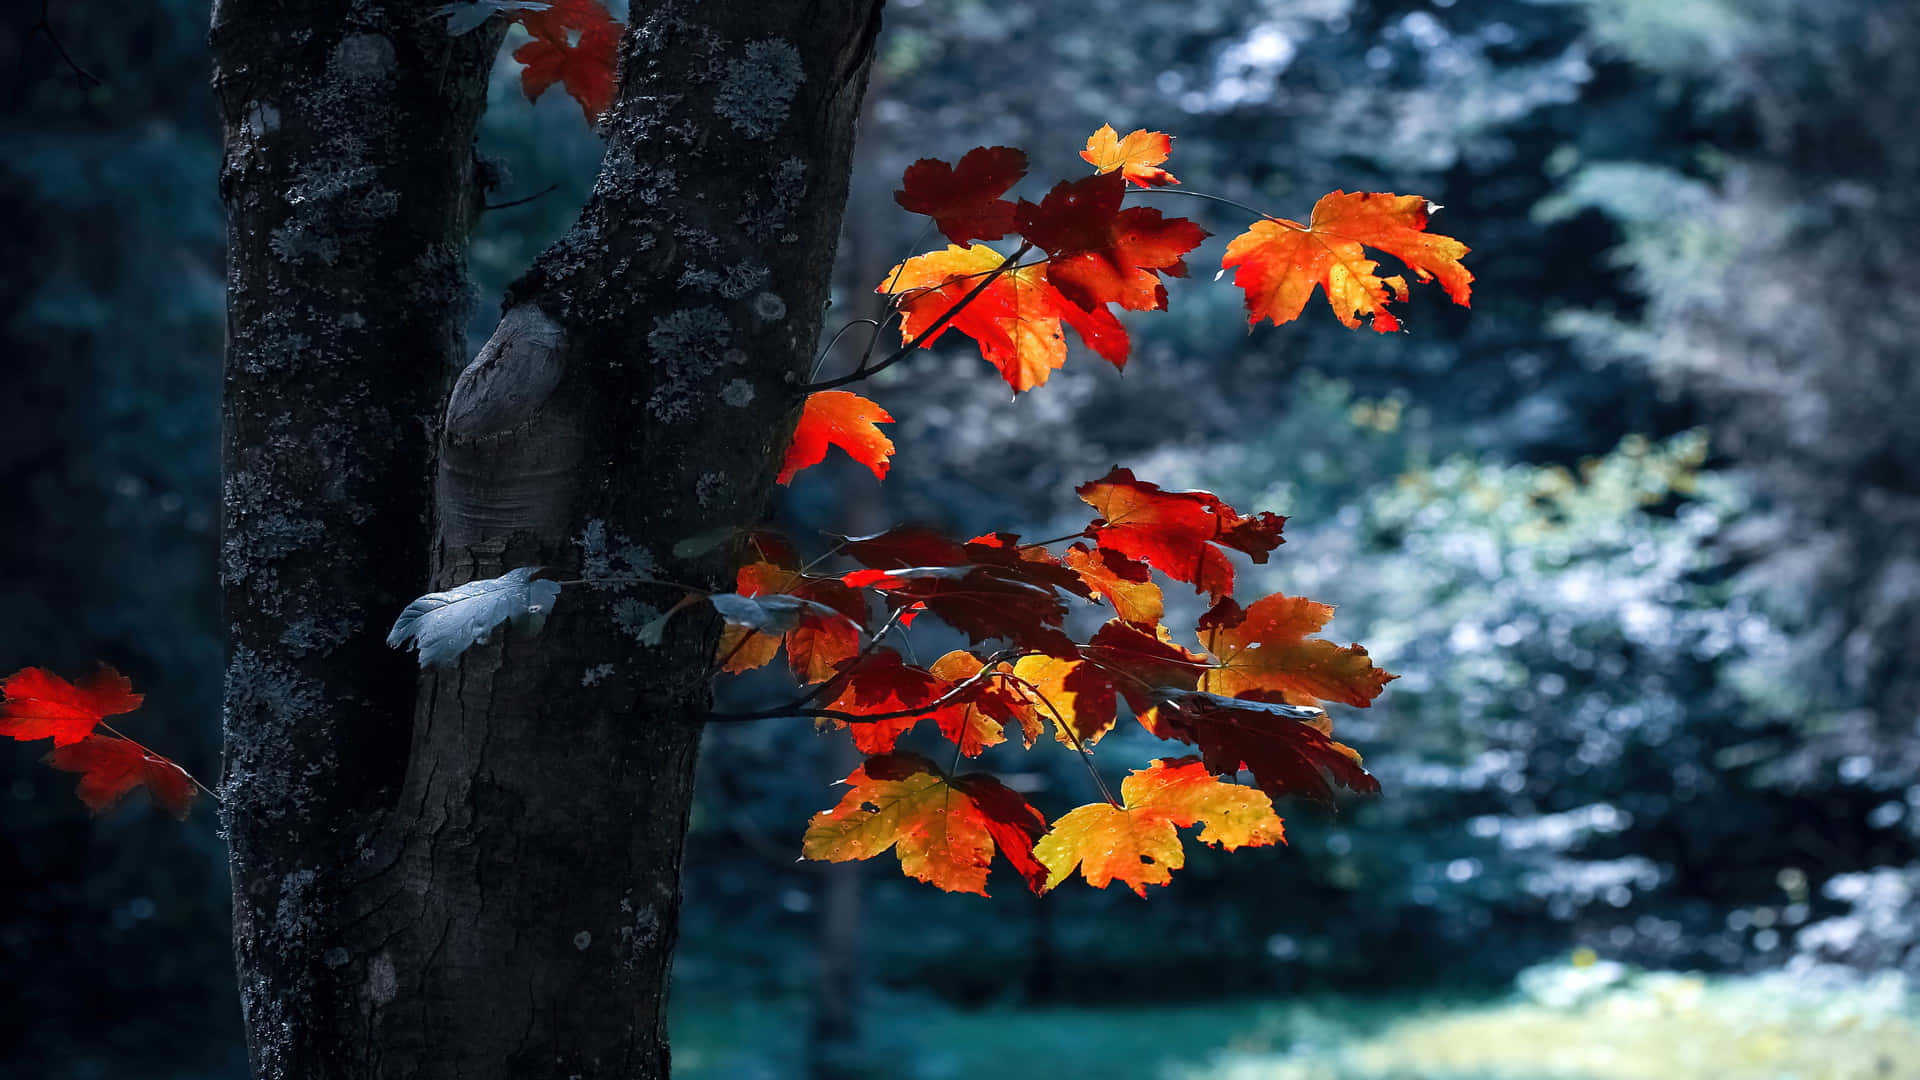 "Take a moment to appreciate the beauty of autumn foliage". Wallpaper